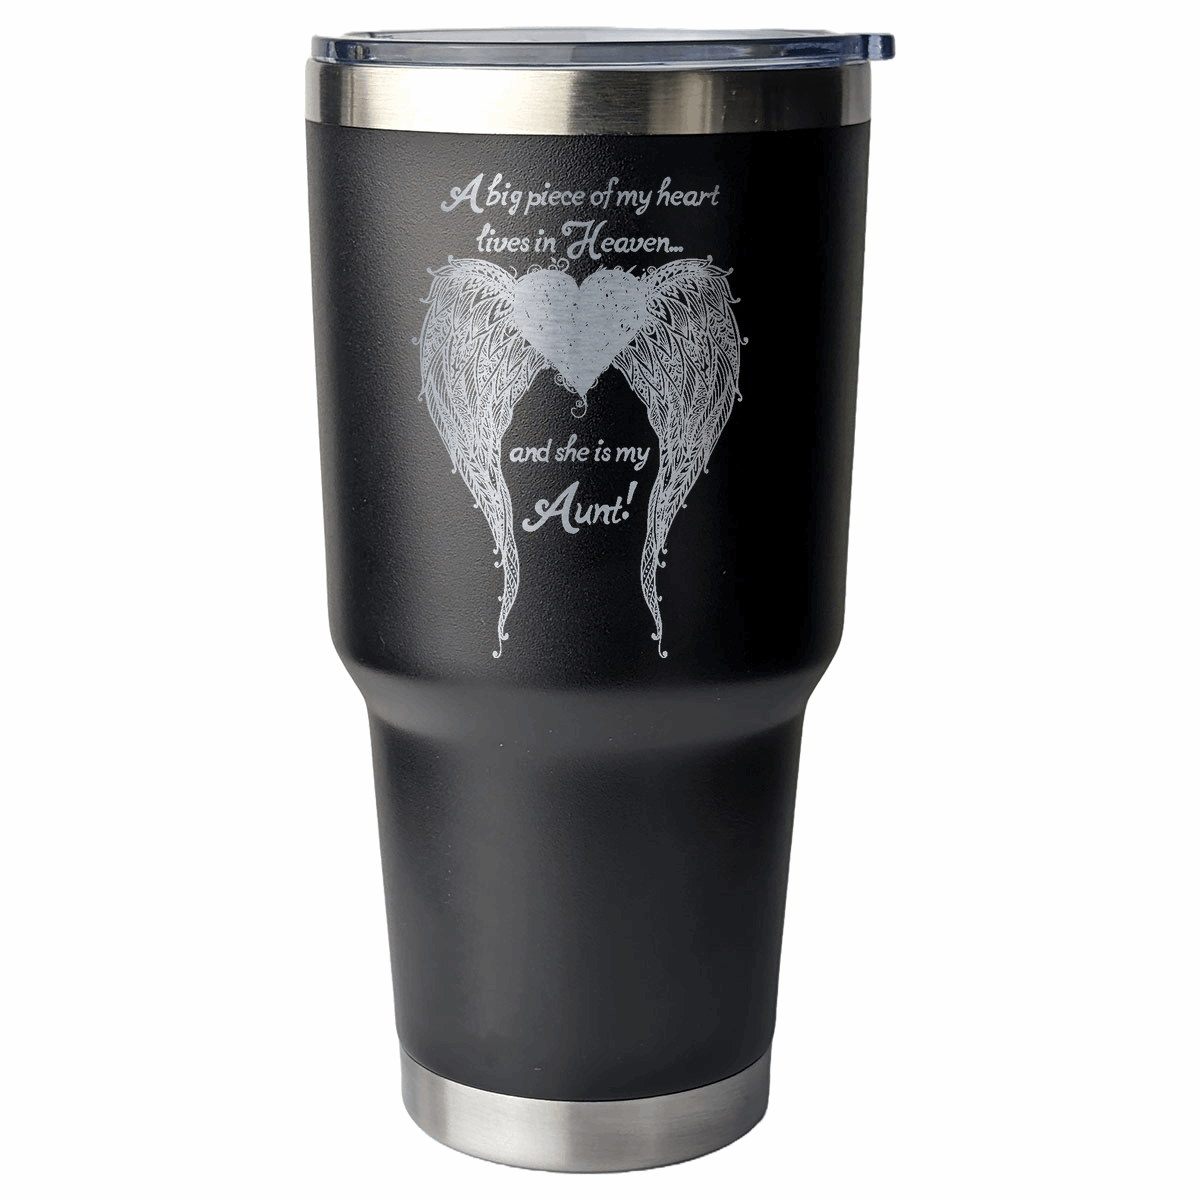 Aunt - A Big Piece of my Heart 30 Ounce Laser Etched Tumbler Black